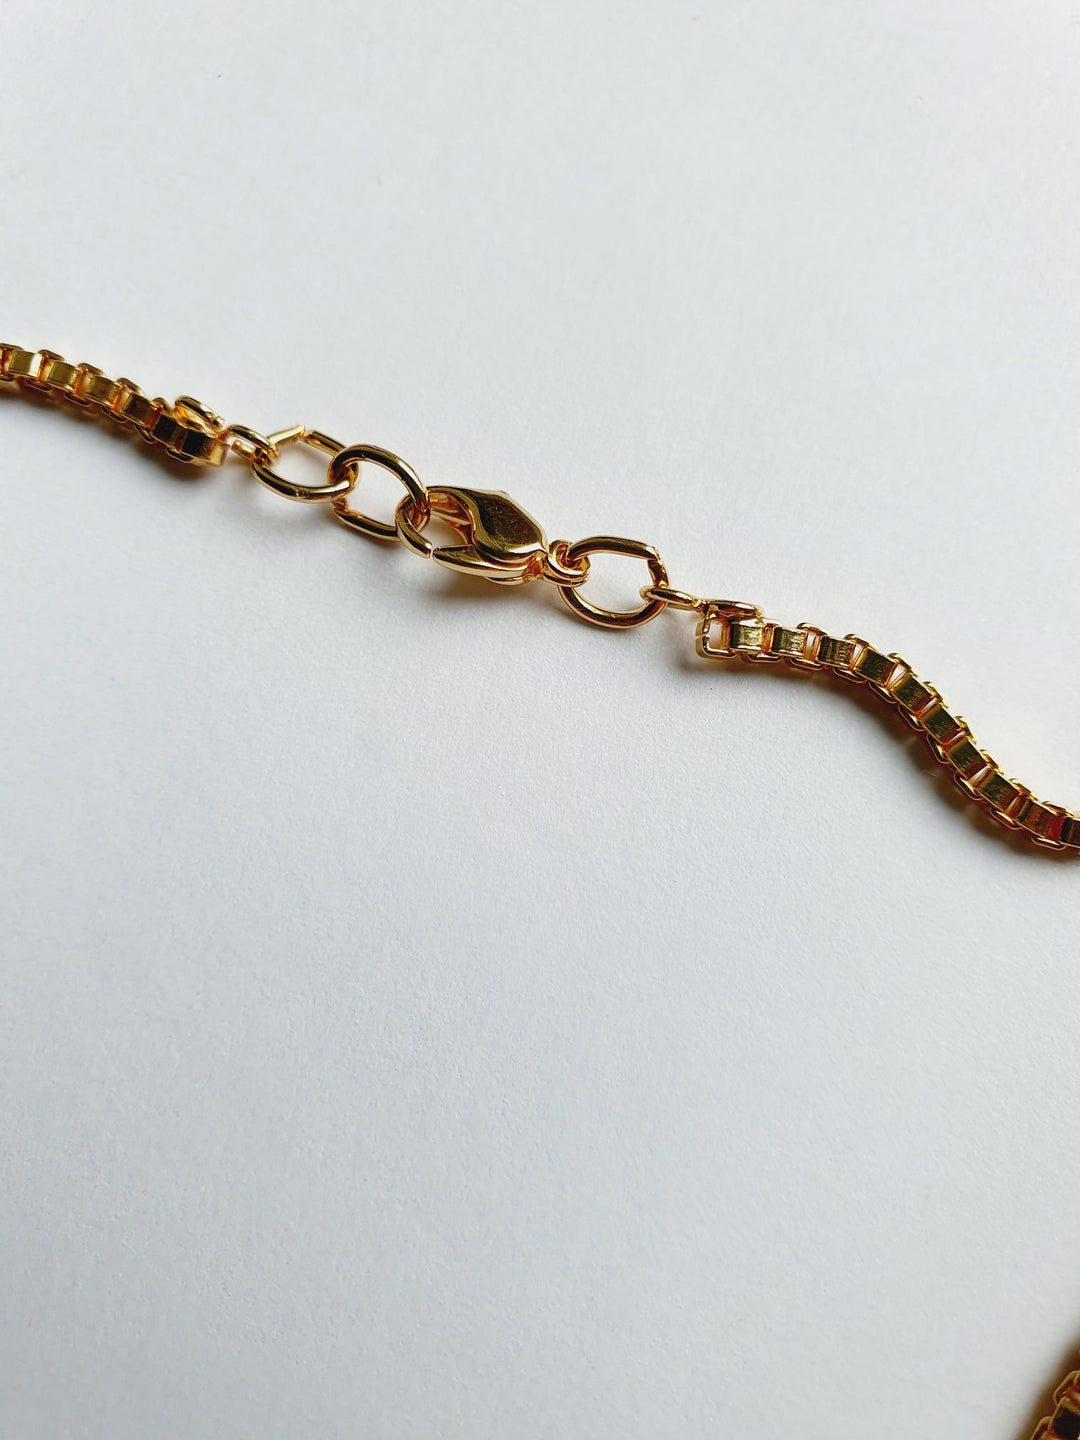 Vintage Gold Plated Thin Box Chain Necklace